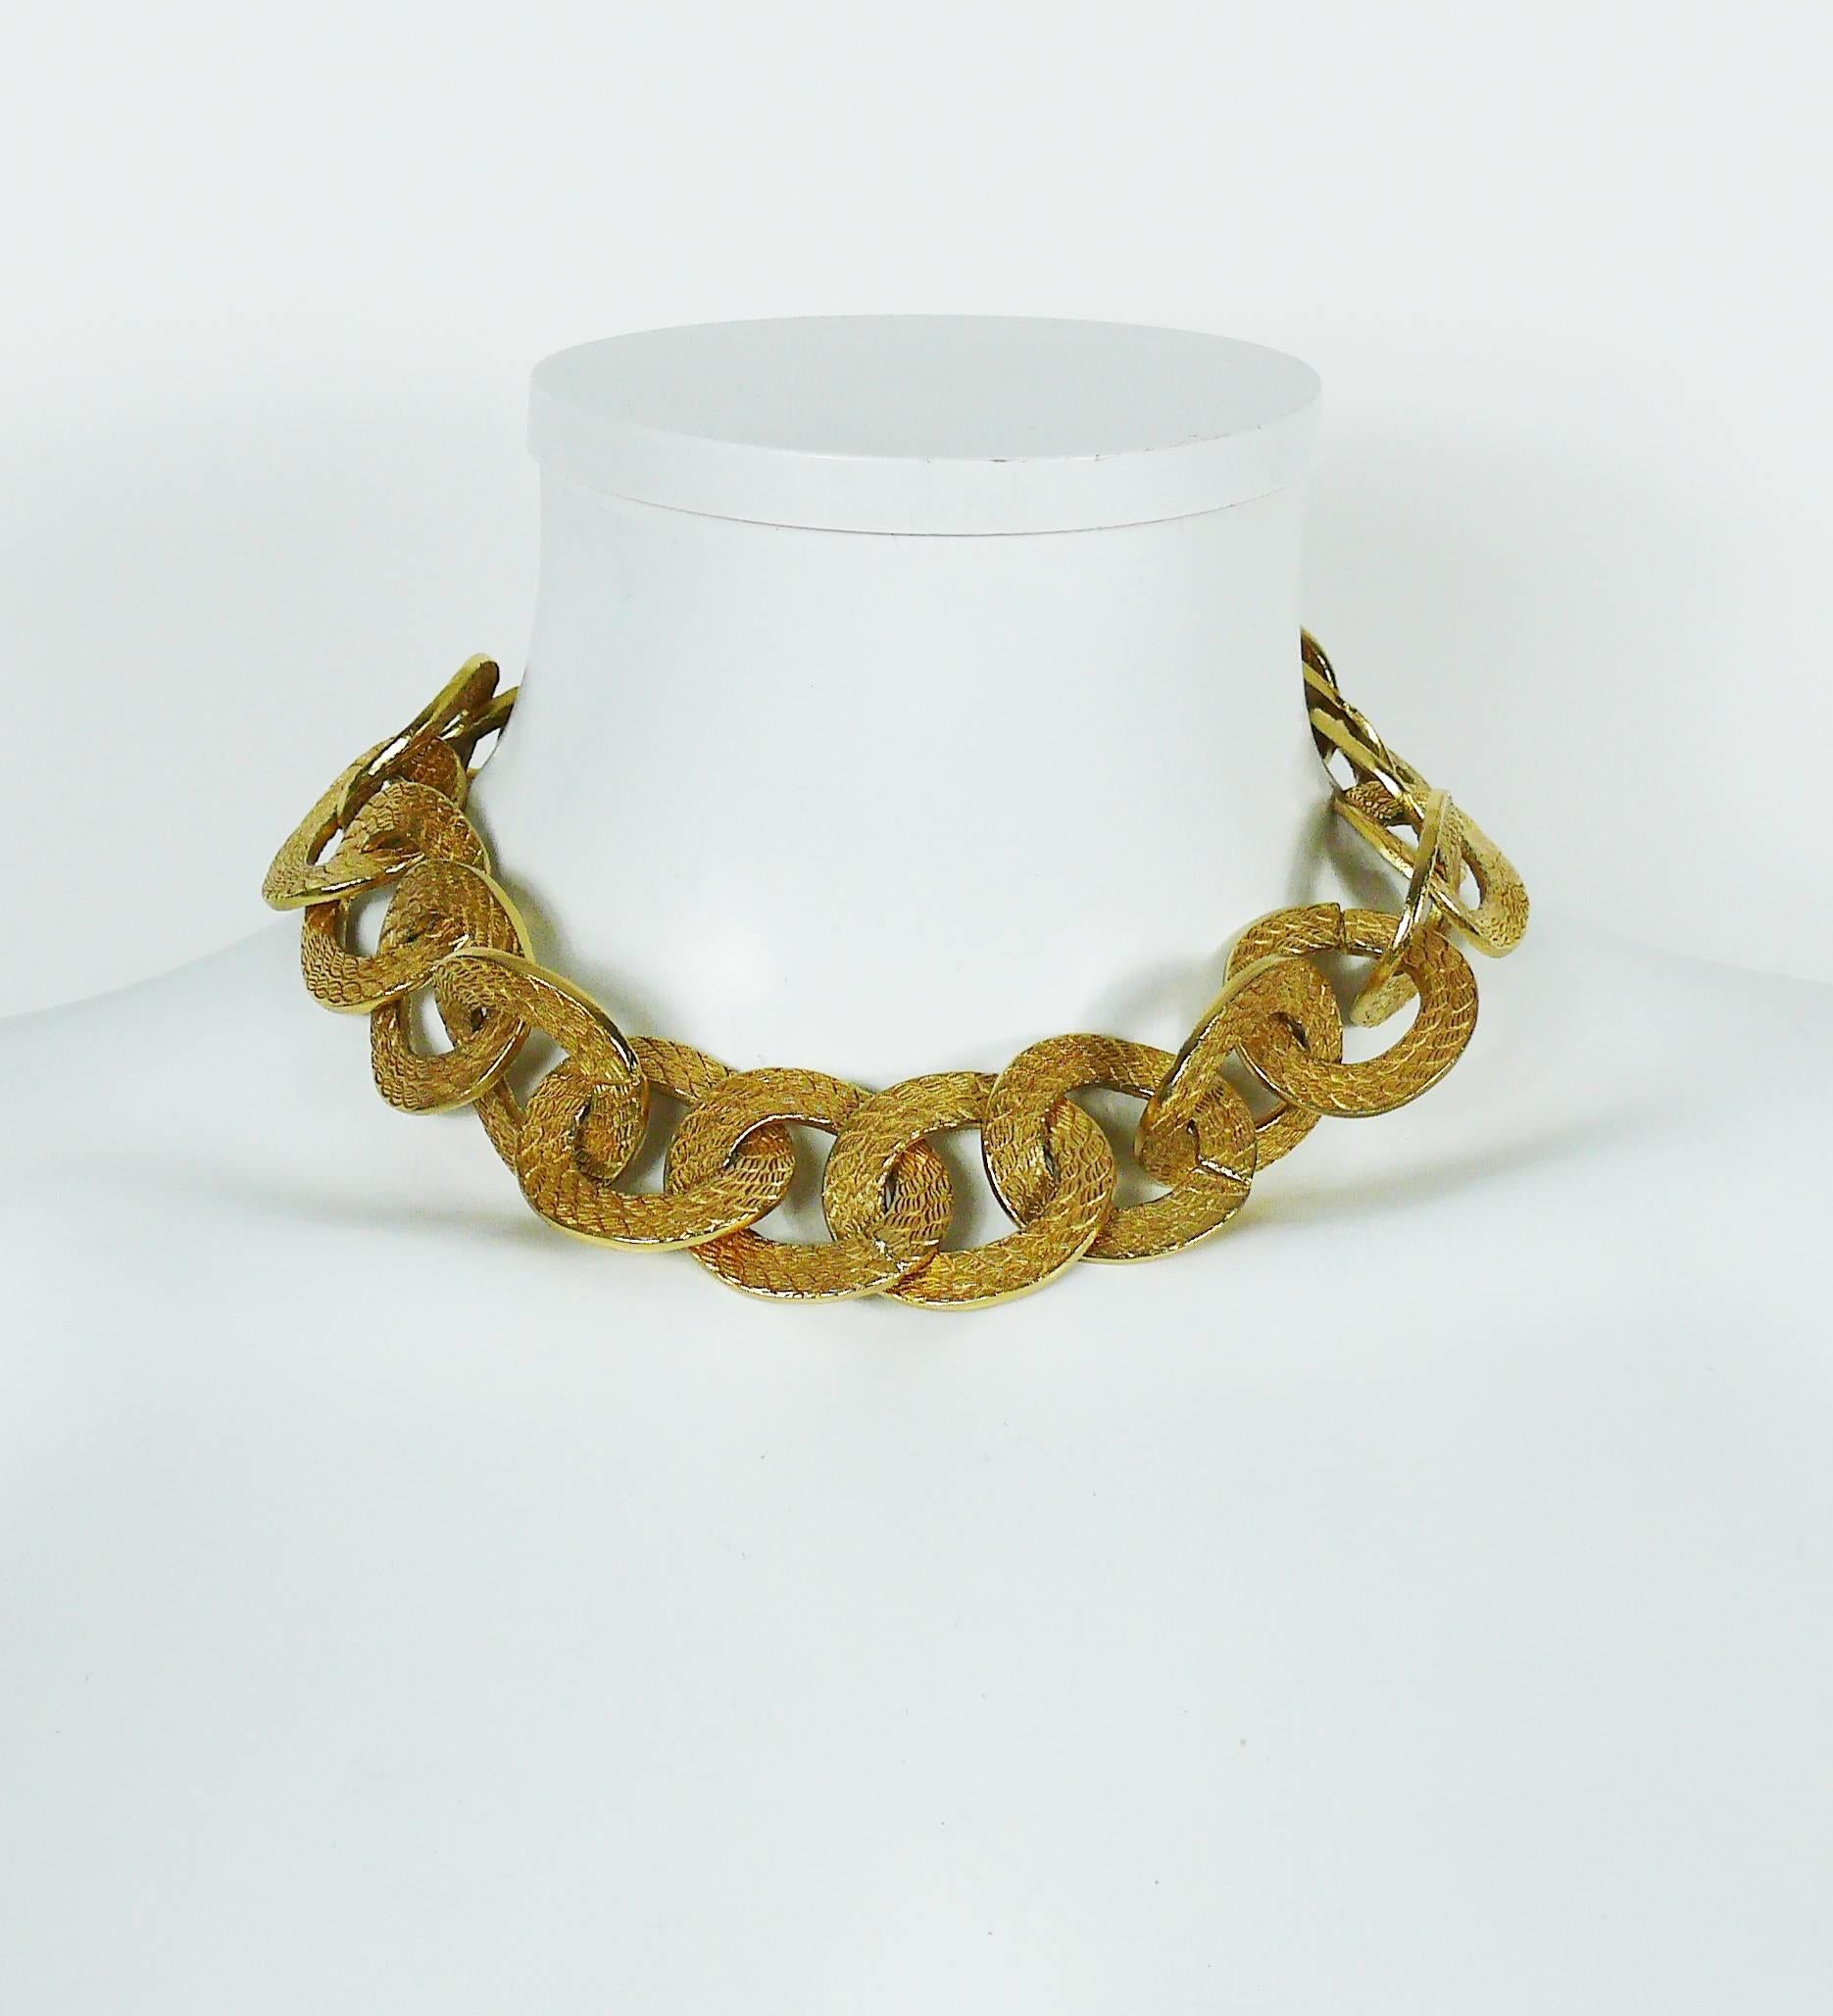 BALENCIAGA vintage gold toned necklace featuring gorgeous massive textured oval links.

T-bar closure.

Embossed BALENCIAGA Paris.
Made in France.

Indicative measurements : length approx. 41 cm (16.14 inches) / links approx. 3.4 cm x 3.2 cm (1.34